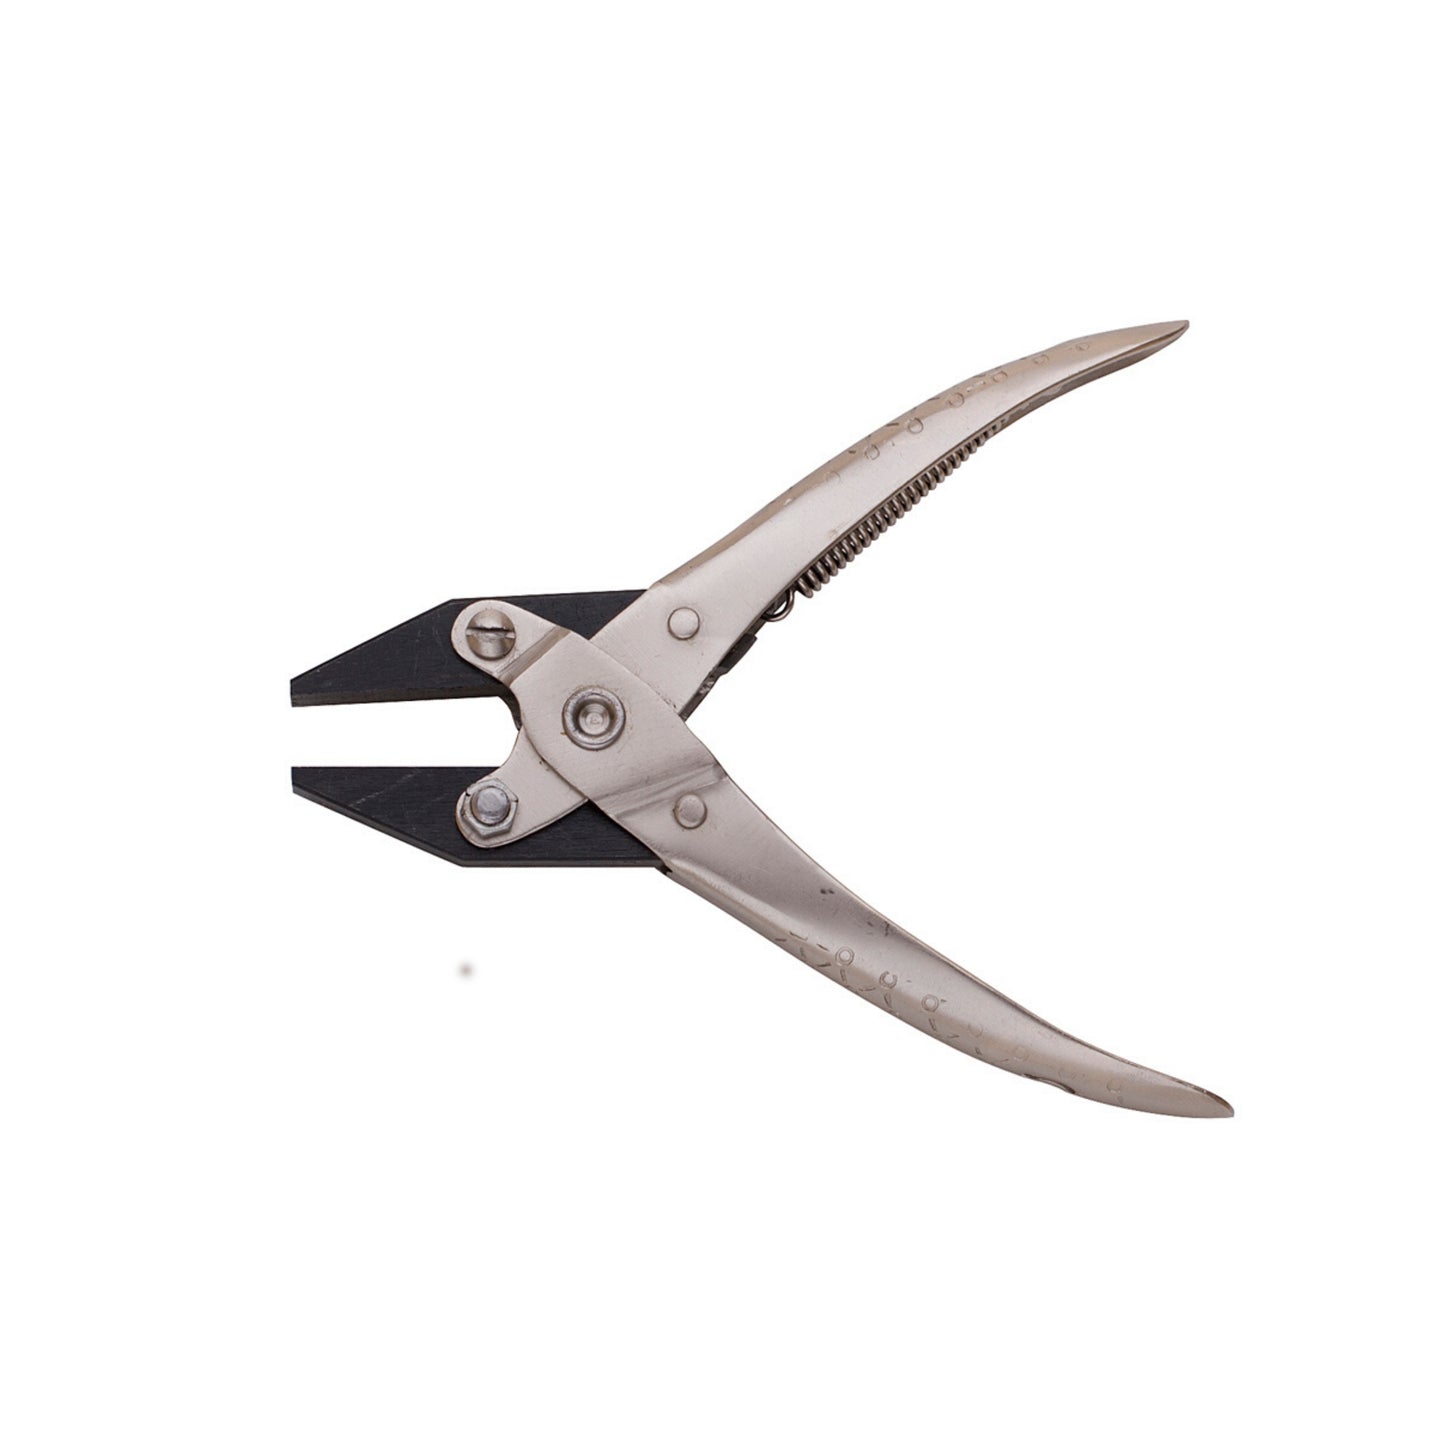 Parallel Jaw Pliers - Flat Nose